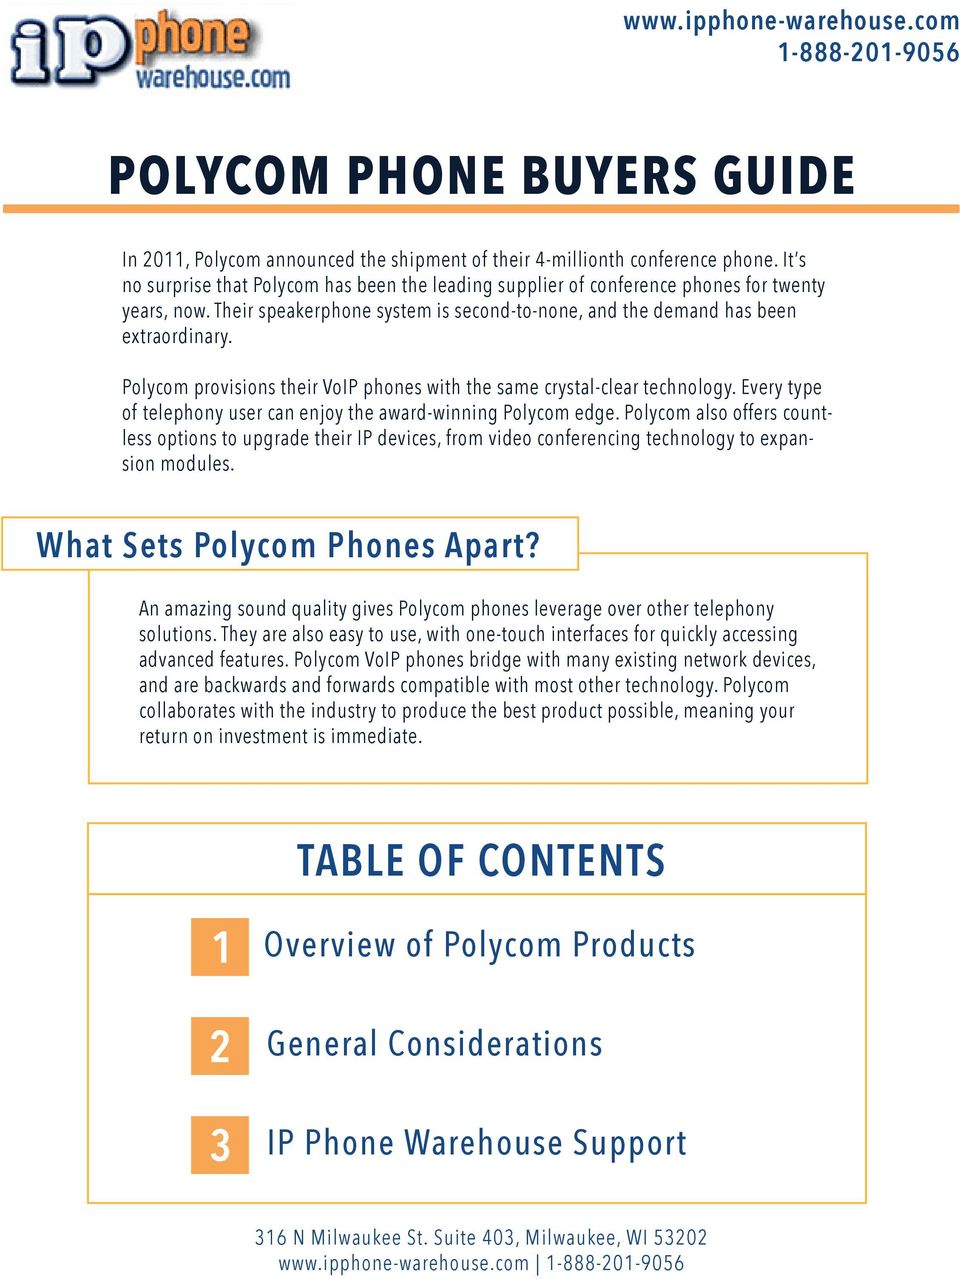 Polycom provisions their VoIP phones with the same crystal-clear technology. Every type of telephony user can enjoy the award-winning Polycom edge.